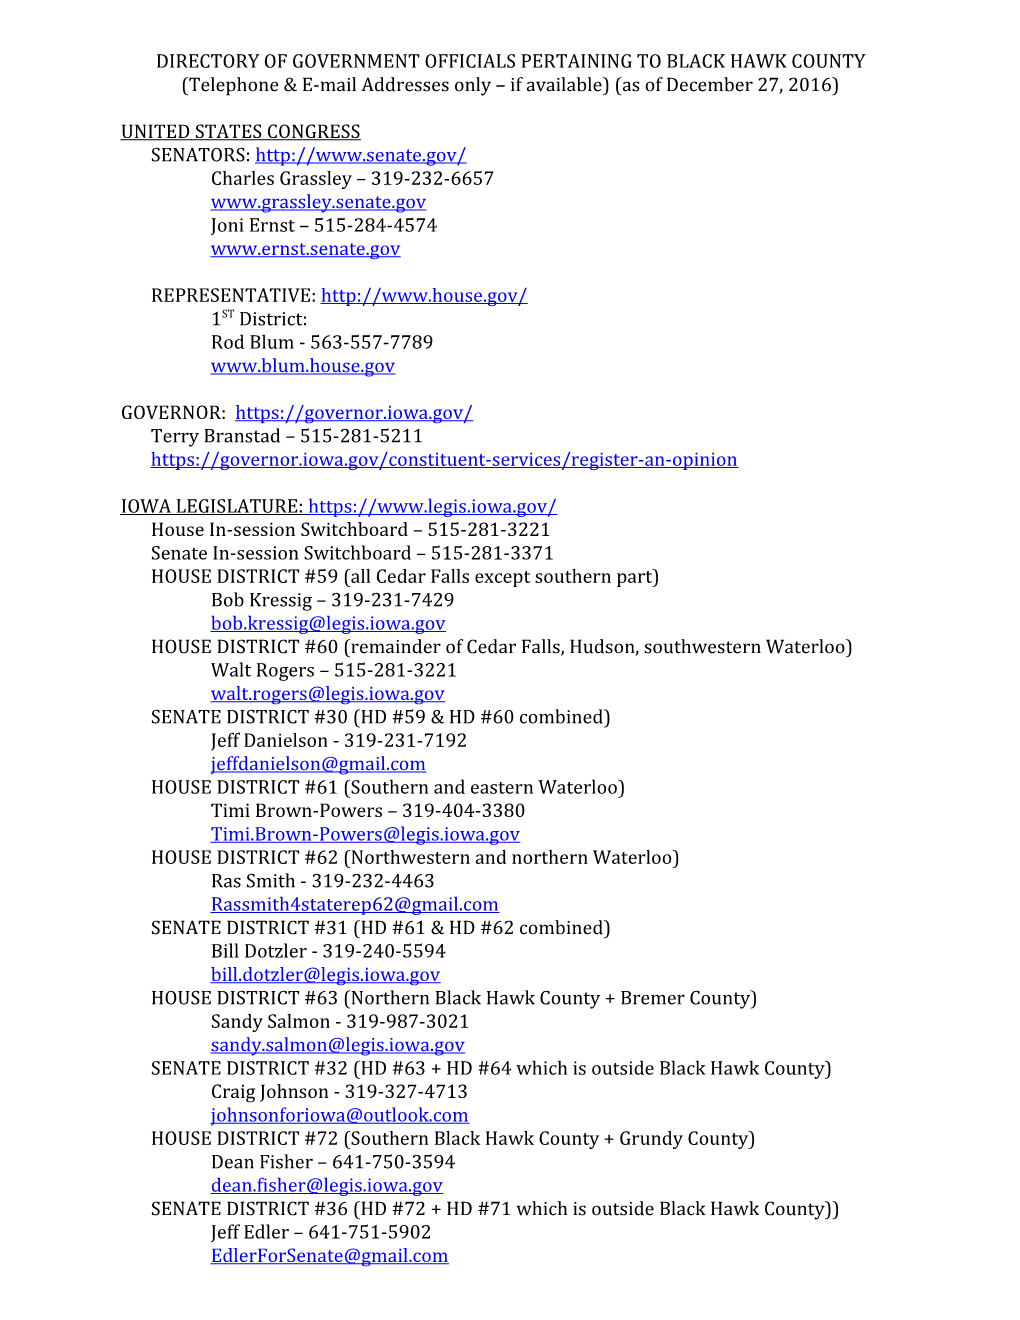 Directory of Government Officials Pertaining to Black Hawk County